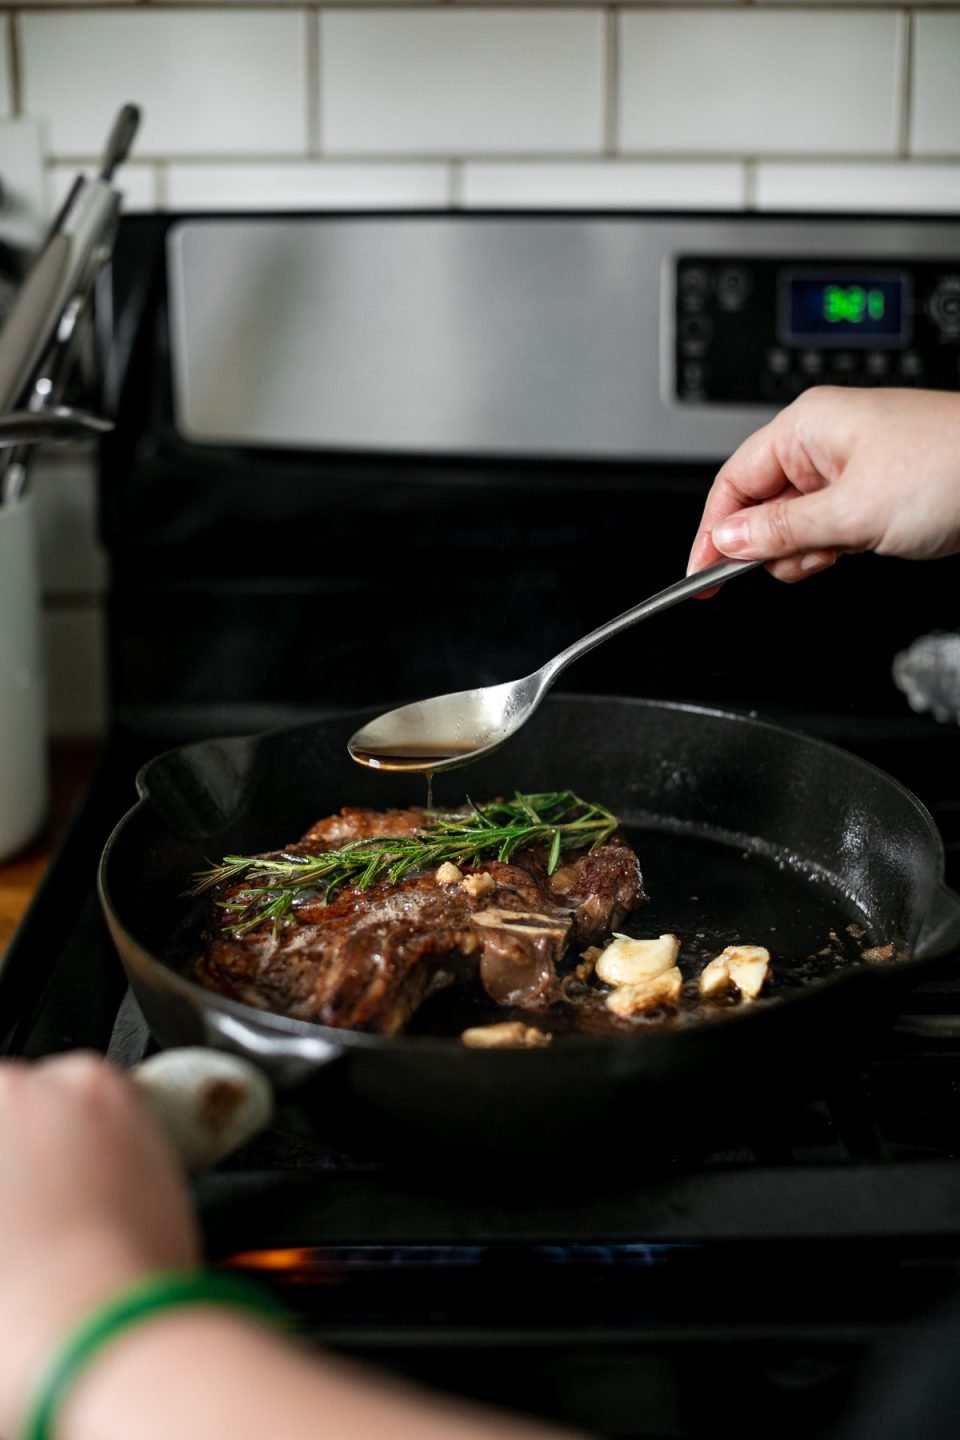 How to cook steak in cast iron skillet: Finishing cast iron steak with butter baste. A woman's hands hold handle of skillet & spoon, spooning browned butter over the steak, which is topped with fresh herbs & crushed garlic cloves.